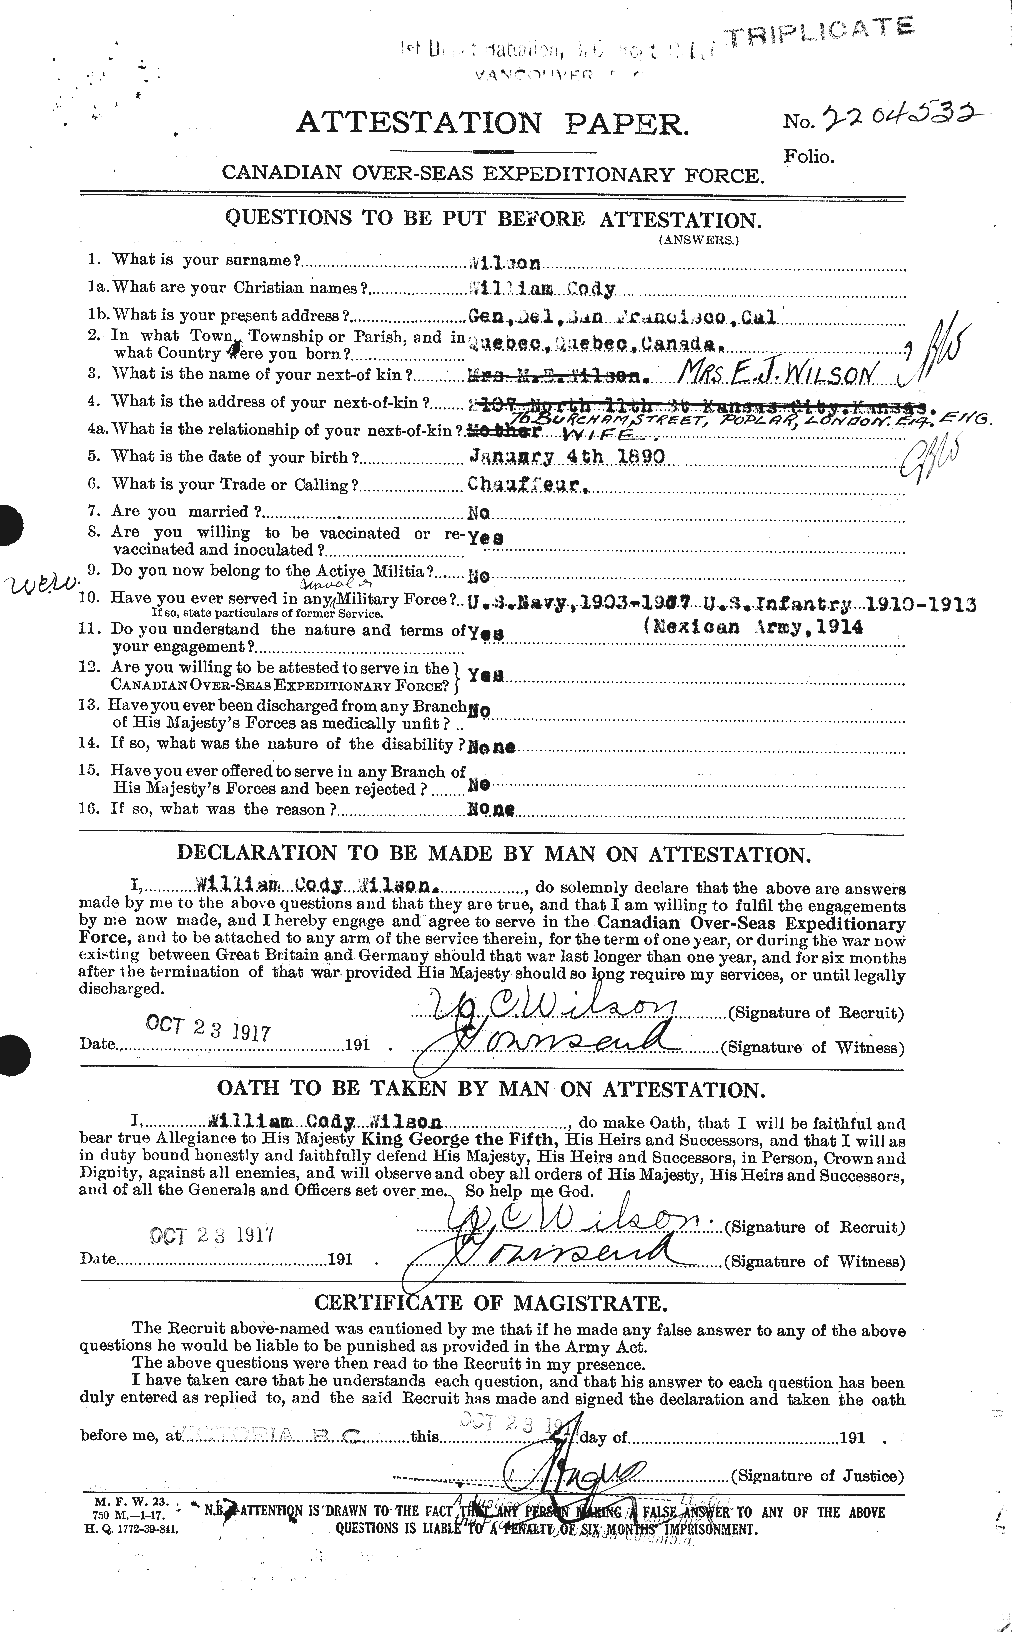 Personnel Records of the First World War - CEF 681957a